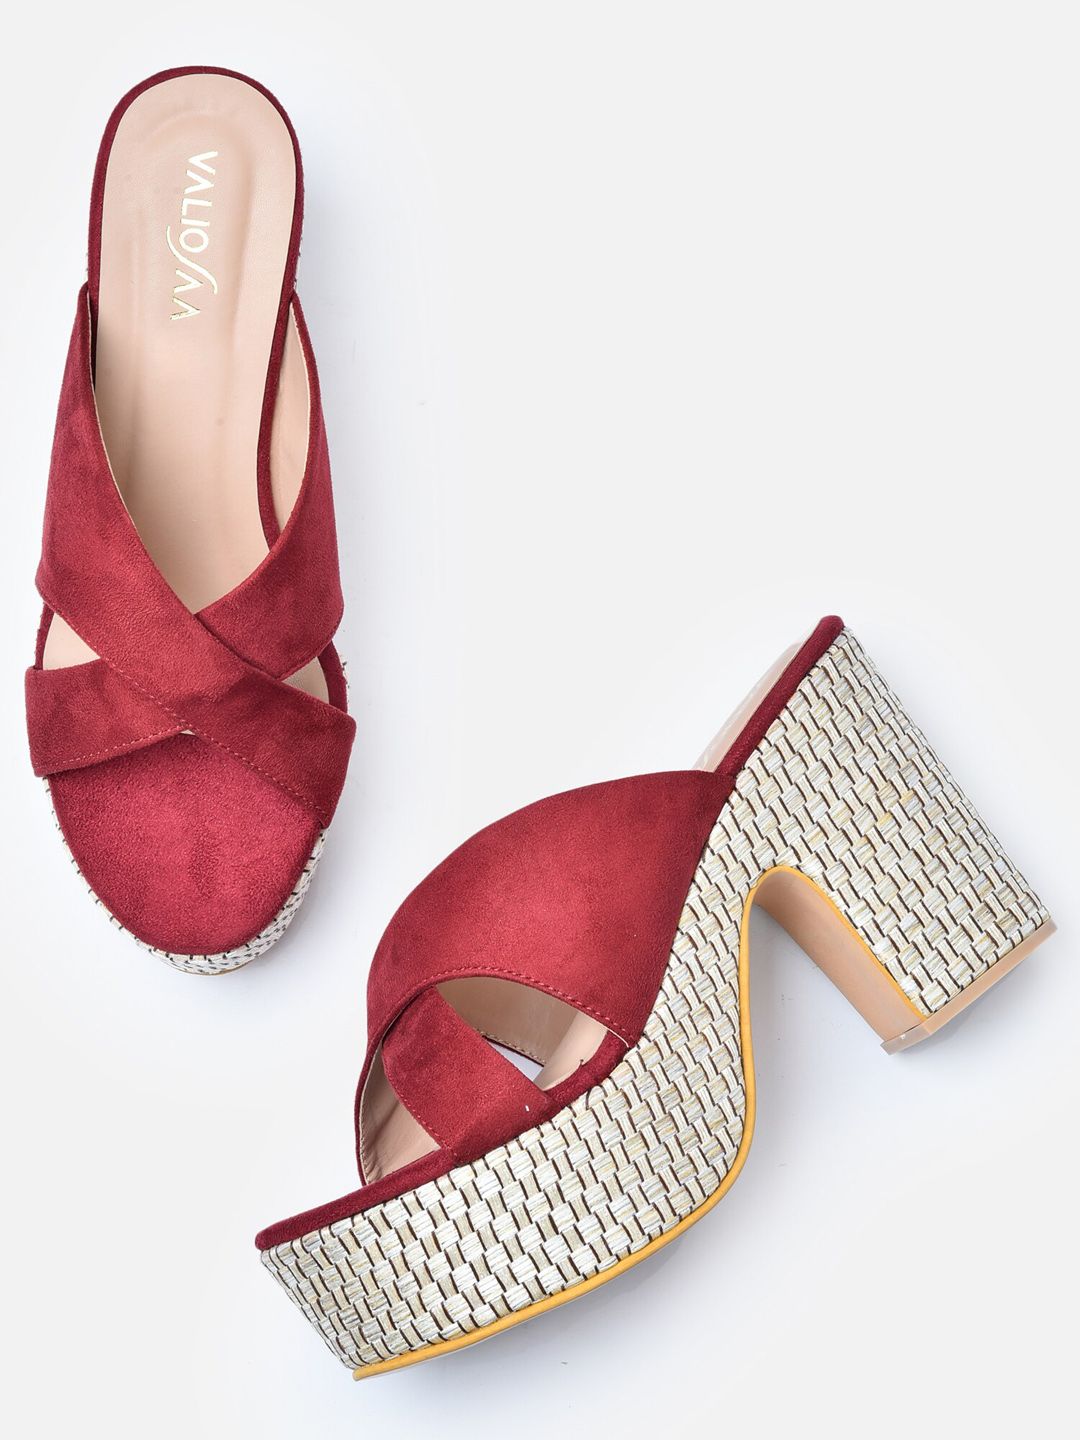 VALIOSAA Maroon Suede Platform Mules with Bows Price in India